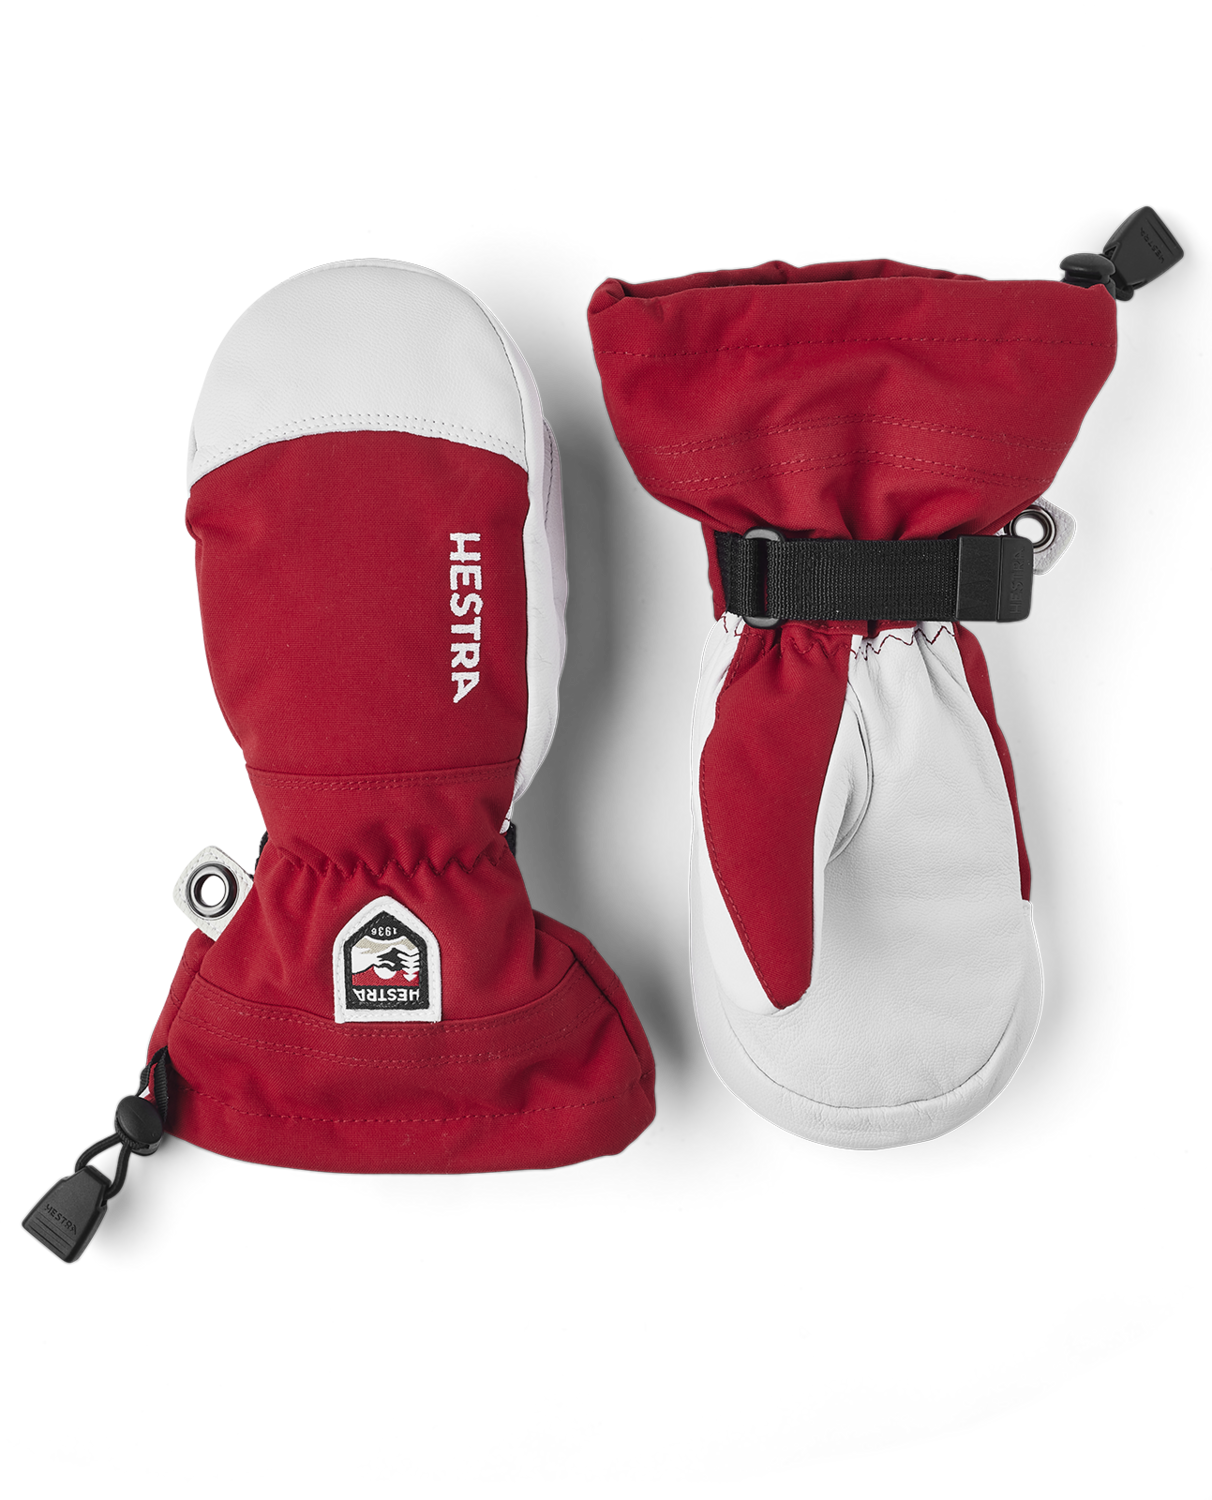 HESTRA ARMY LEATHER HELI SKI MITT JUNIOR, Color: RED, Size: 3